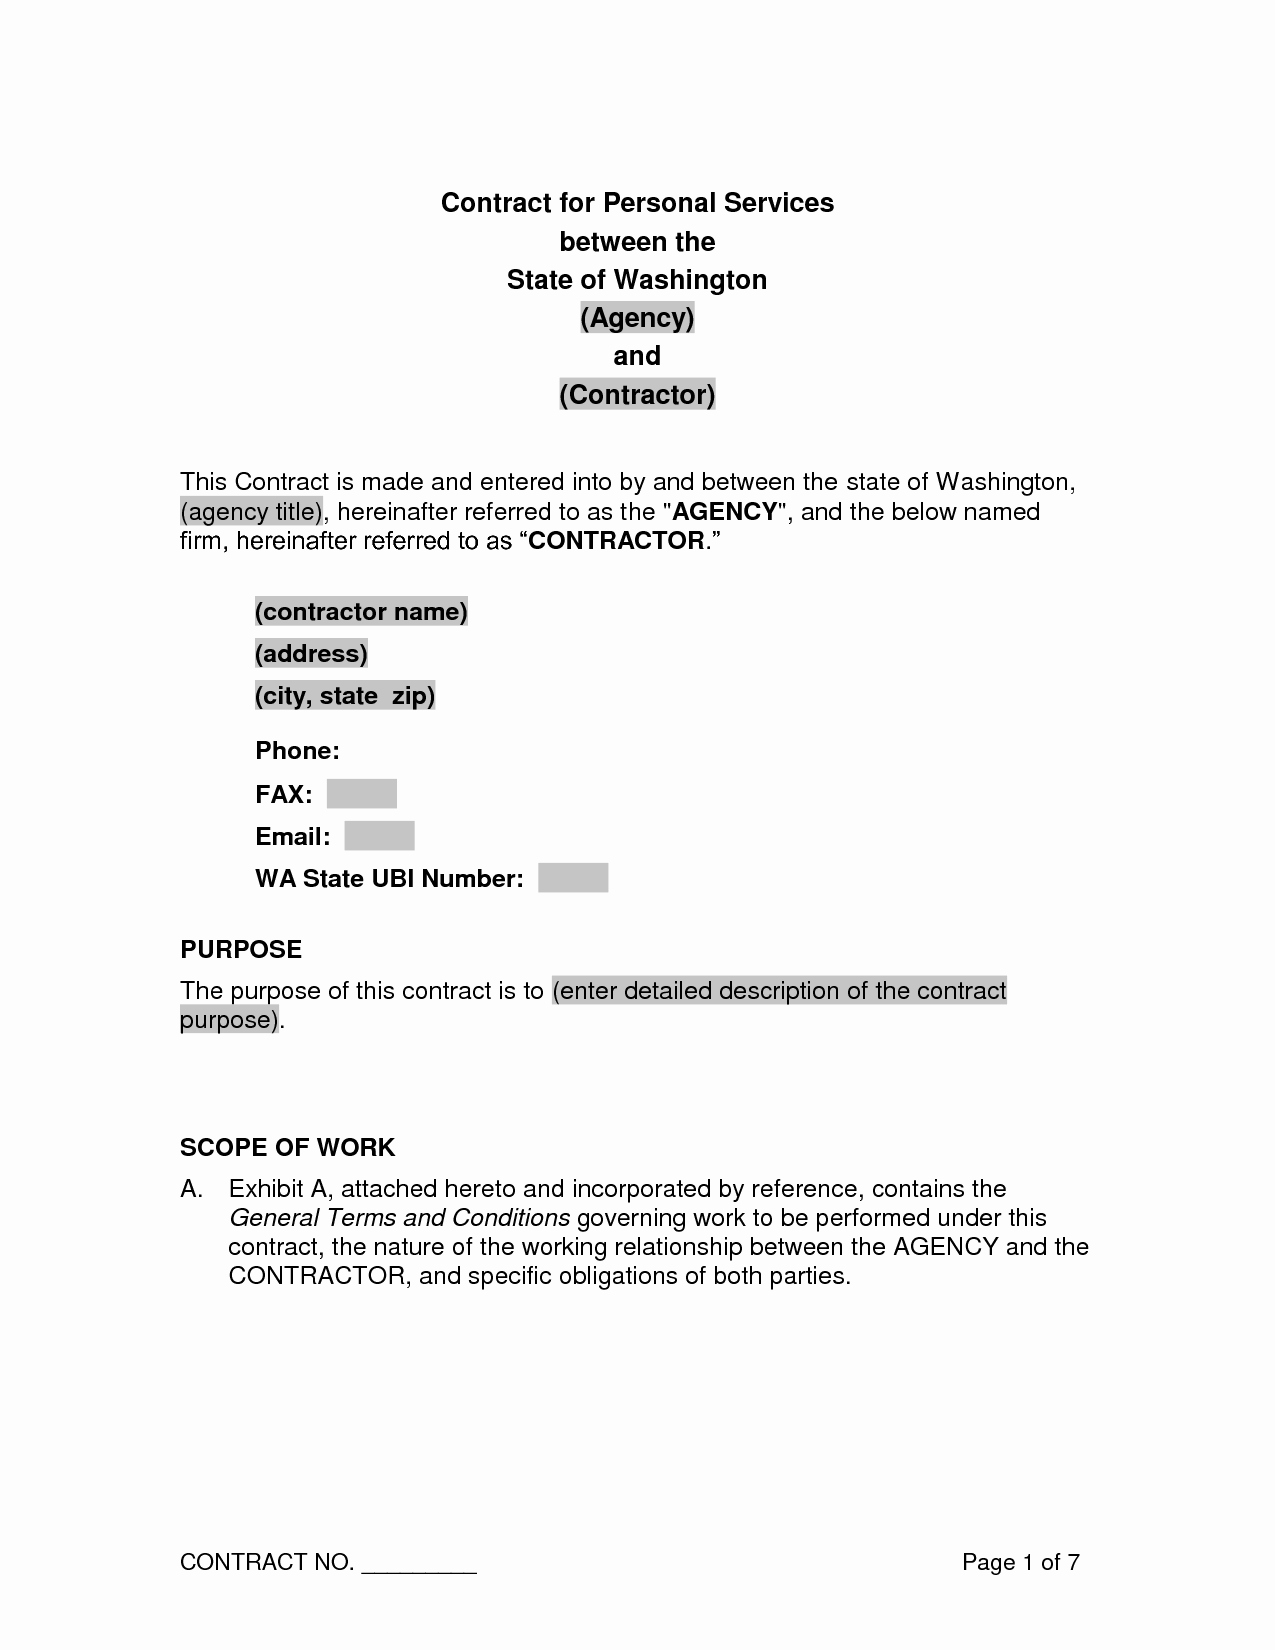 10 Best Of Personal Contract Agreement Sample